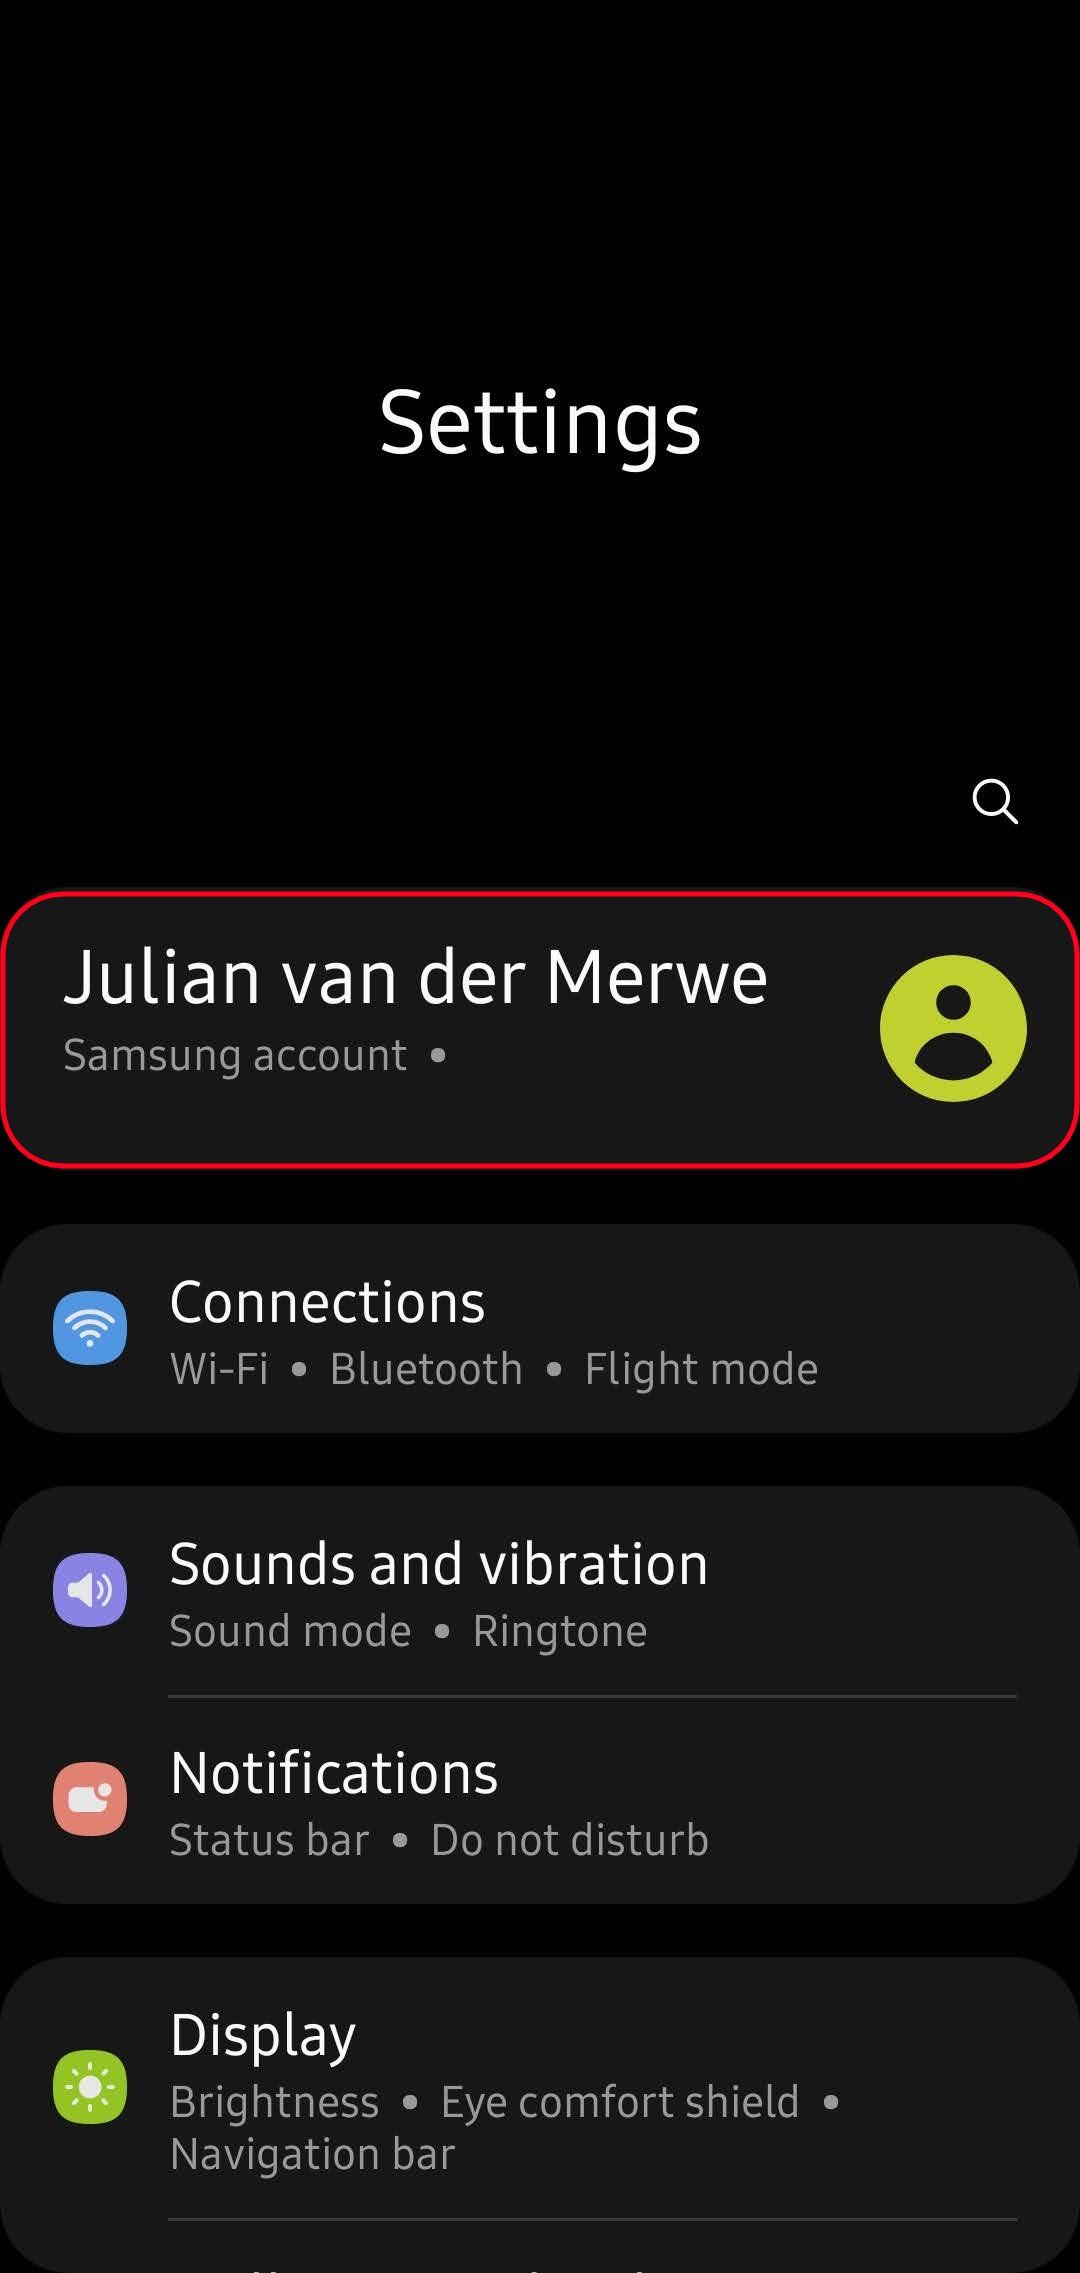 Samsung settings app with the samsung account options highlighted